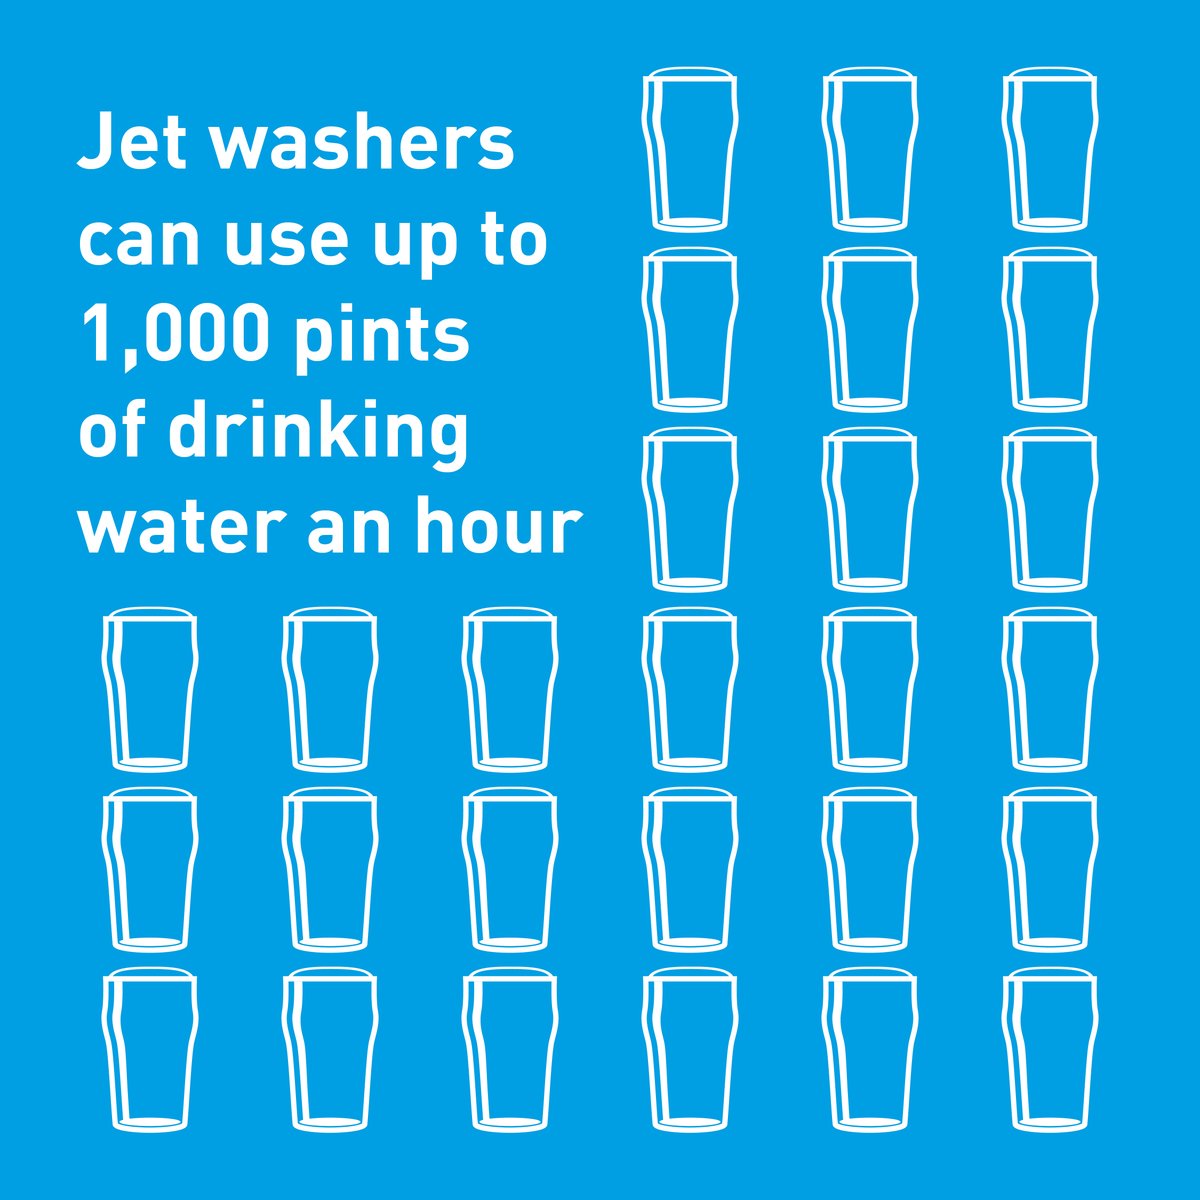 A surprising fact for you… jet washers can use up to 1,000 pints of drinking water an hour! Why not reduce the amount of water you use, as the more water we use, the bigger our carbon footprint. Have a nosey at more of our water saving tips here ms.spr.ly/6017bI24J